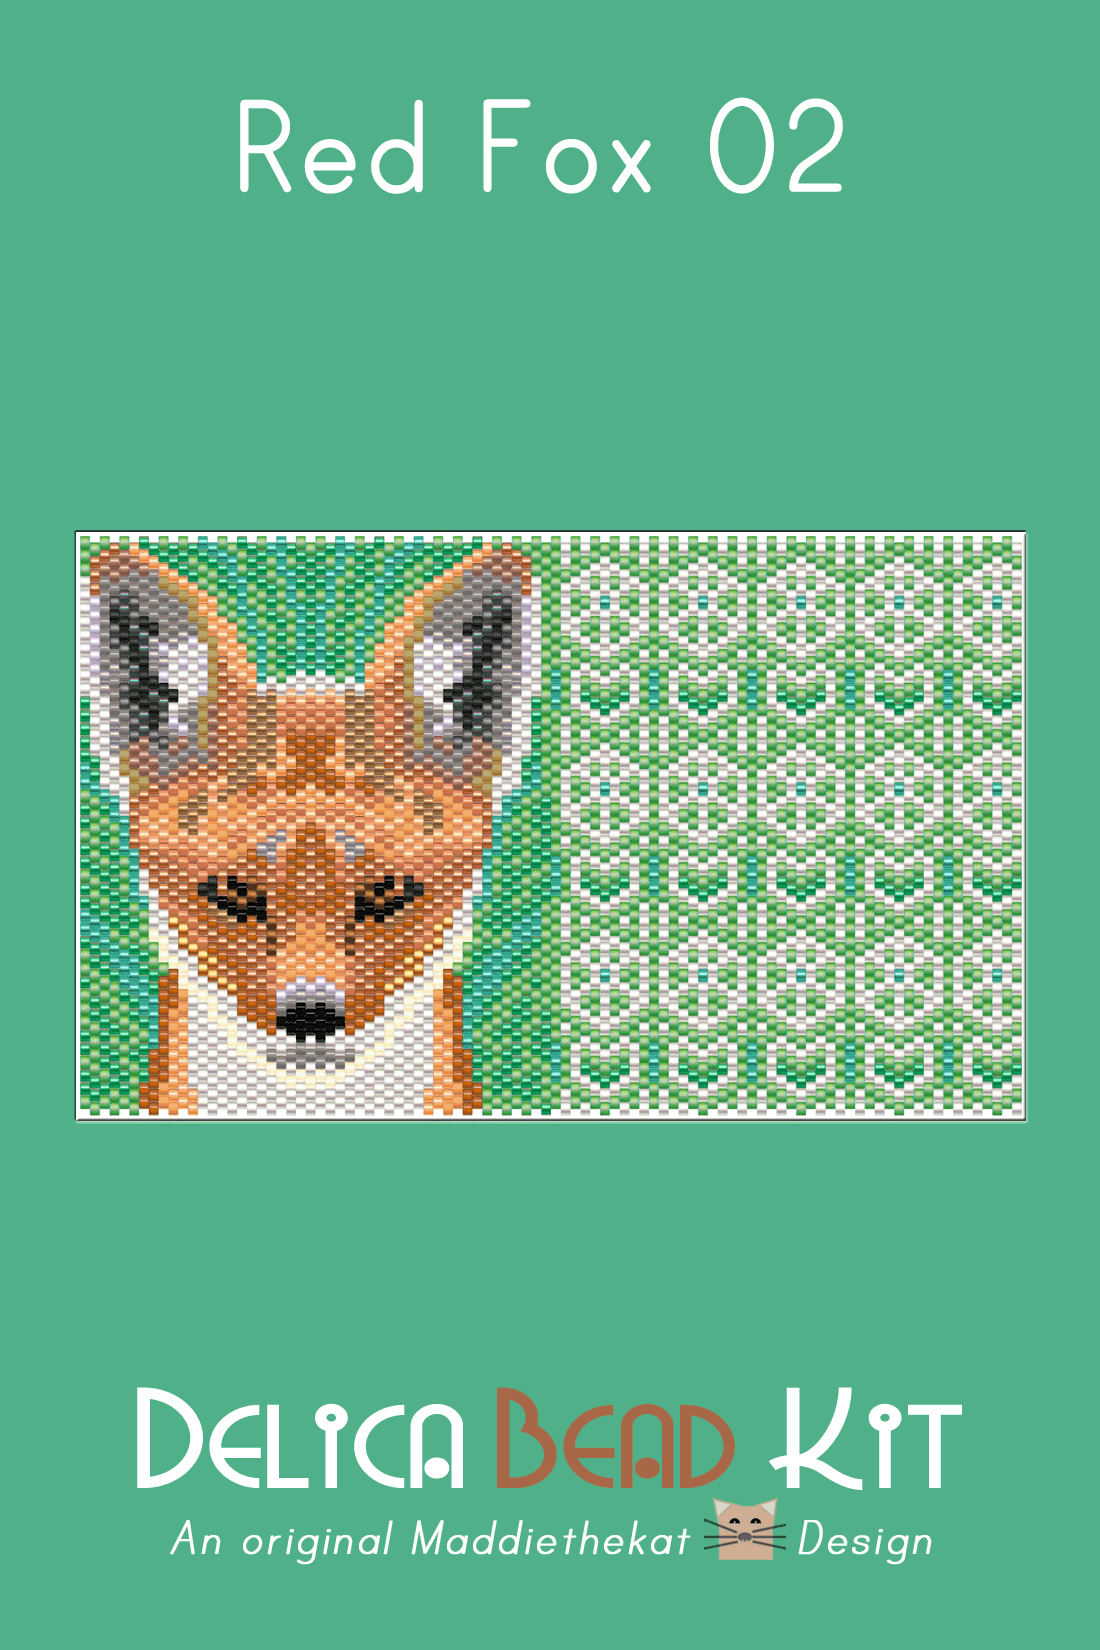 Red Fox 02 with Back Peyote Bead Pattern or Bead Kit